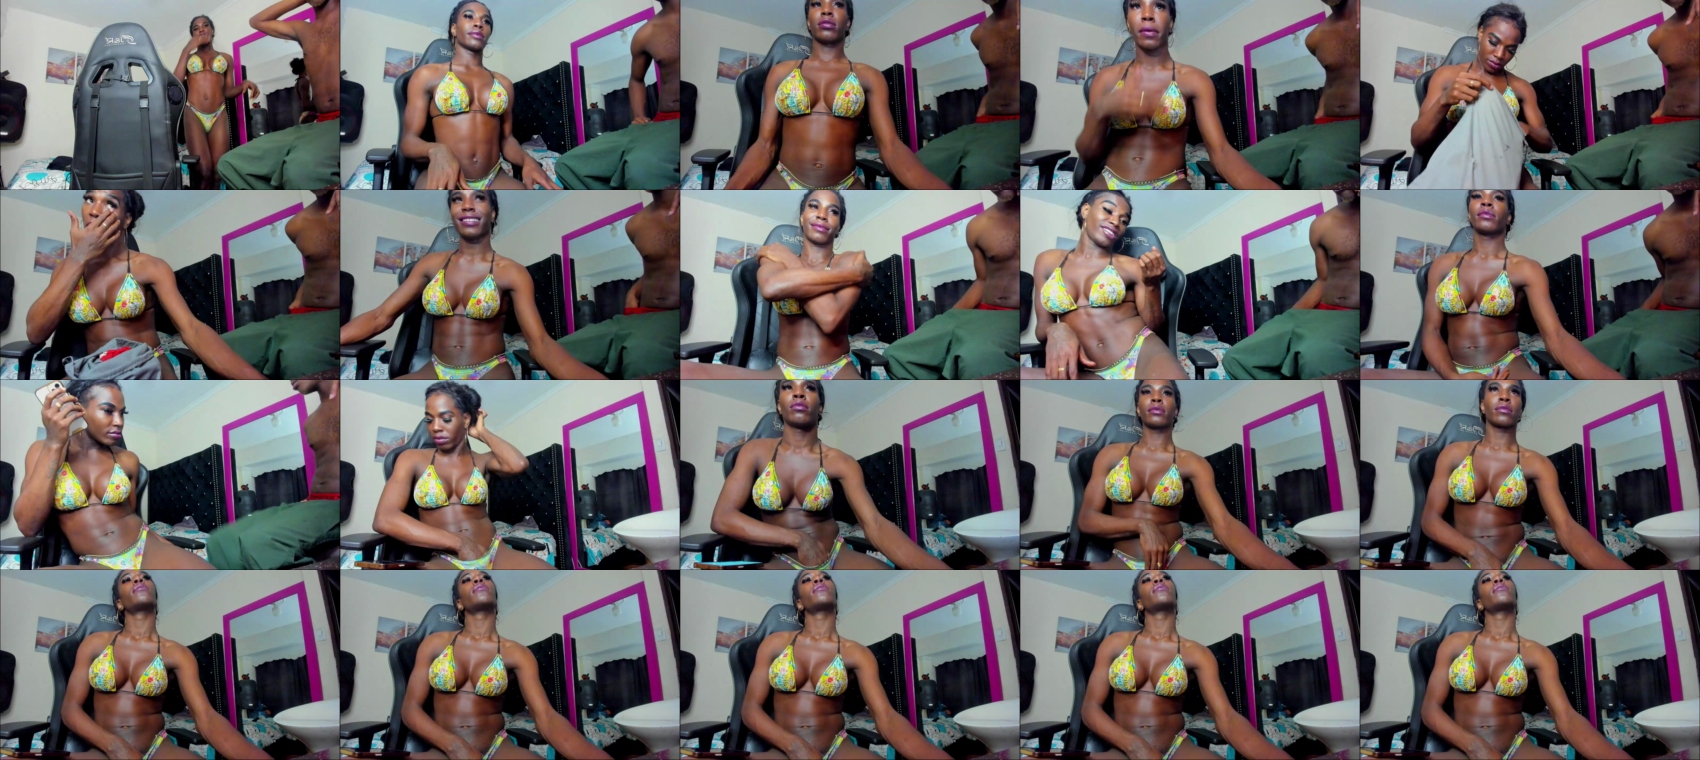 nathaly_rich_chocolate ts 10-08-2022  trans play